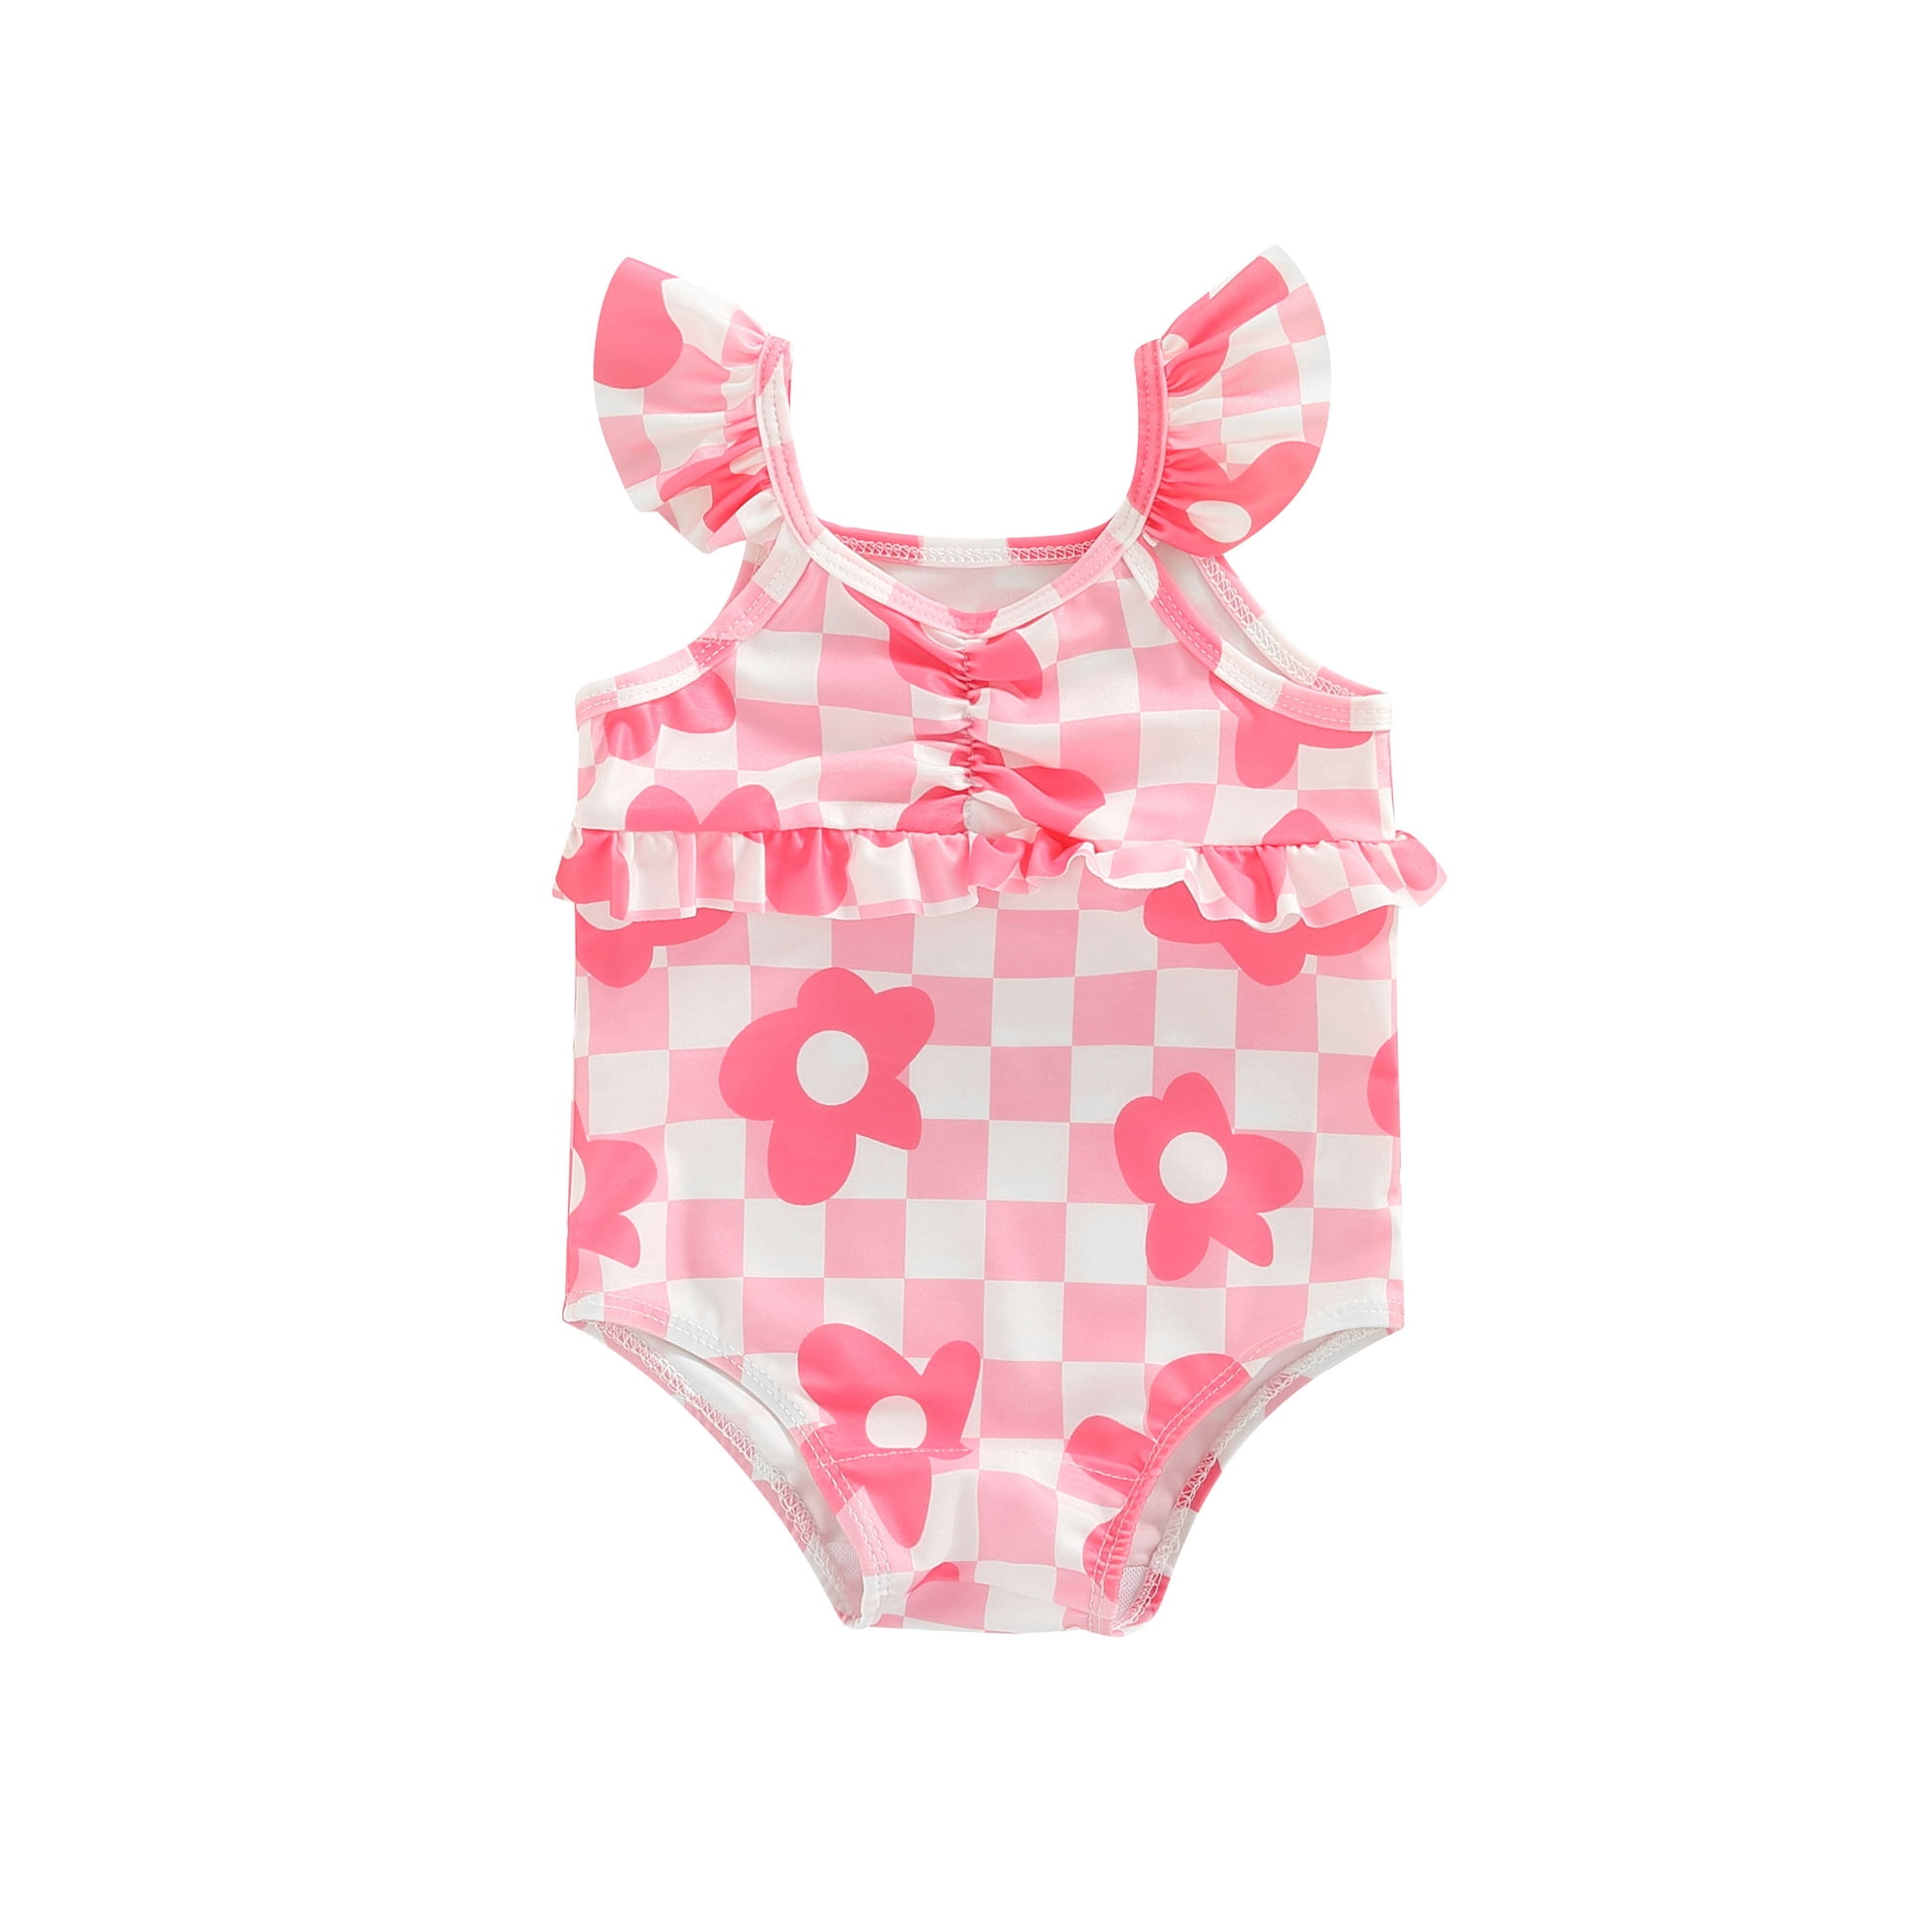 aturustex Girl Swimsuit 2 Pcs Outfit Kid Baby Print / Plaid Pattern Bathing  Suit Fly Sleeve Tops Matching Shorts (9 Month-4 Years) 